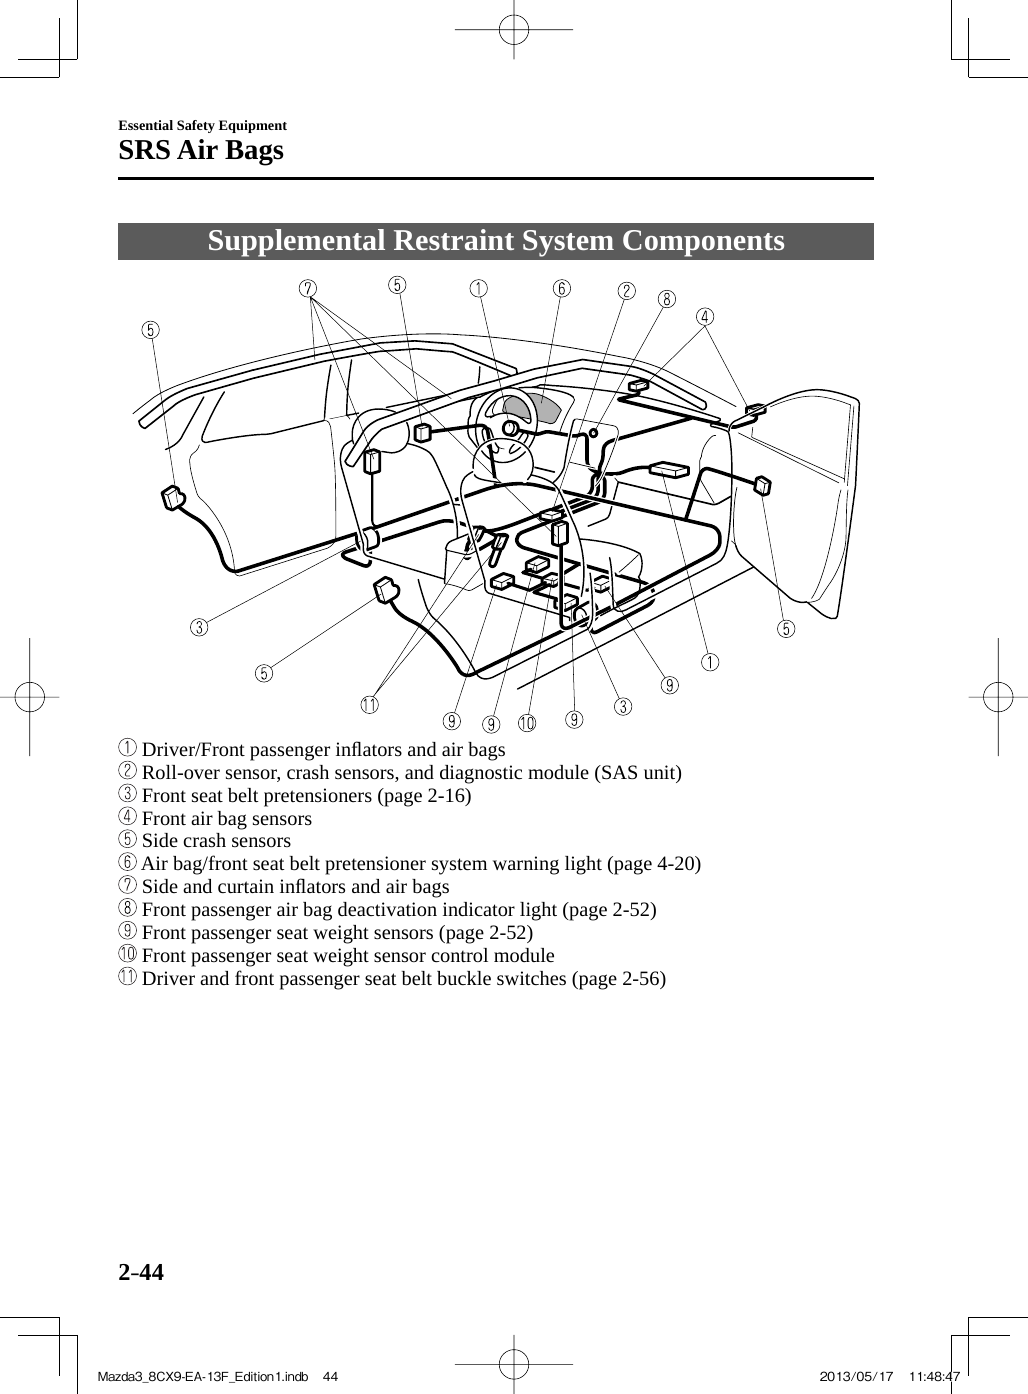 2–44Essential Safety EquipmentSRS Air Bags Supplemental Restraint System Components                   Driver/Front passenger inﬂ ators and air bags      Roll-over sensor, crash sensors, and diagnostic module (SAS unit)      Front seat belt pretensioners (page  2-16 )      Front air bag sensors      Side crash sensors      Air bag/front seat belt pretensioner system warning light (page  4-20 )      Side and curtain inﬂ ators and air bags      Front passenger air bag deactivation indicator light (page  2-52 )      Front passenger seat weight sensors (page  2-52 )      Front passenger seat weight sensor control module      Driver and front passenger seat belt buckle switches (page  2-56 )Mazda3_8CX9-EA-13F_Edition1.indb   44Mazda3_8CX9-EA-13F_Edition1.indb   44 2013/05/17   11:48:472013/05/17   11:48:47